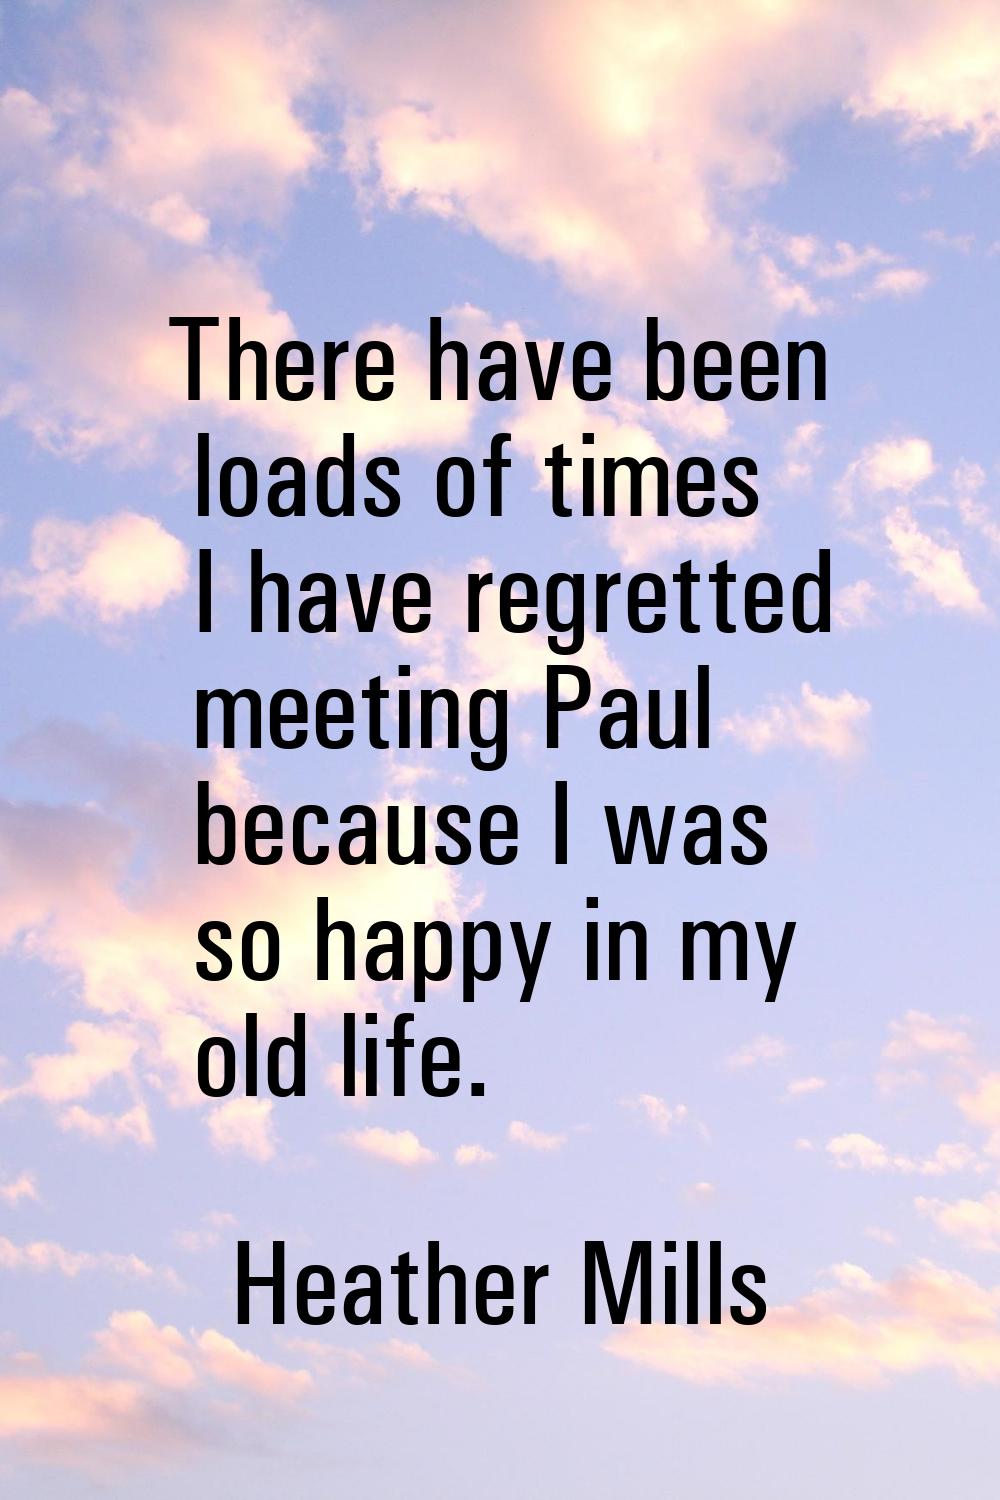 There have been loads of times I have regretted meeting Paul because I was so happy in my old life.